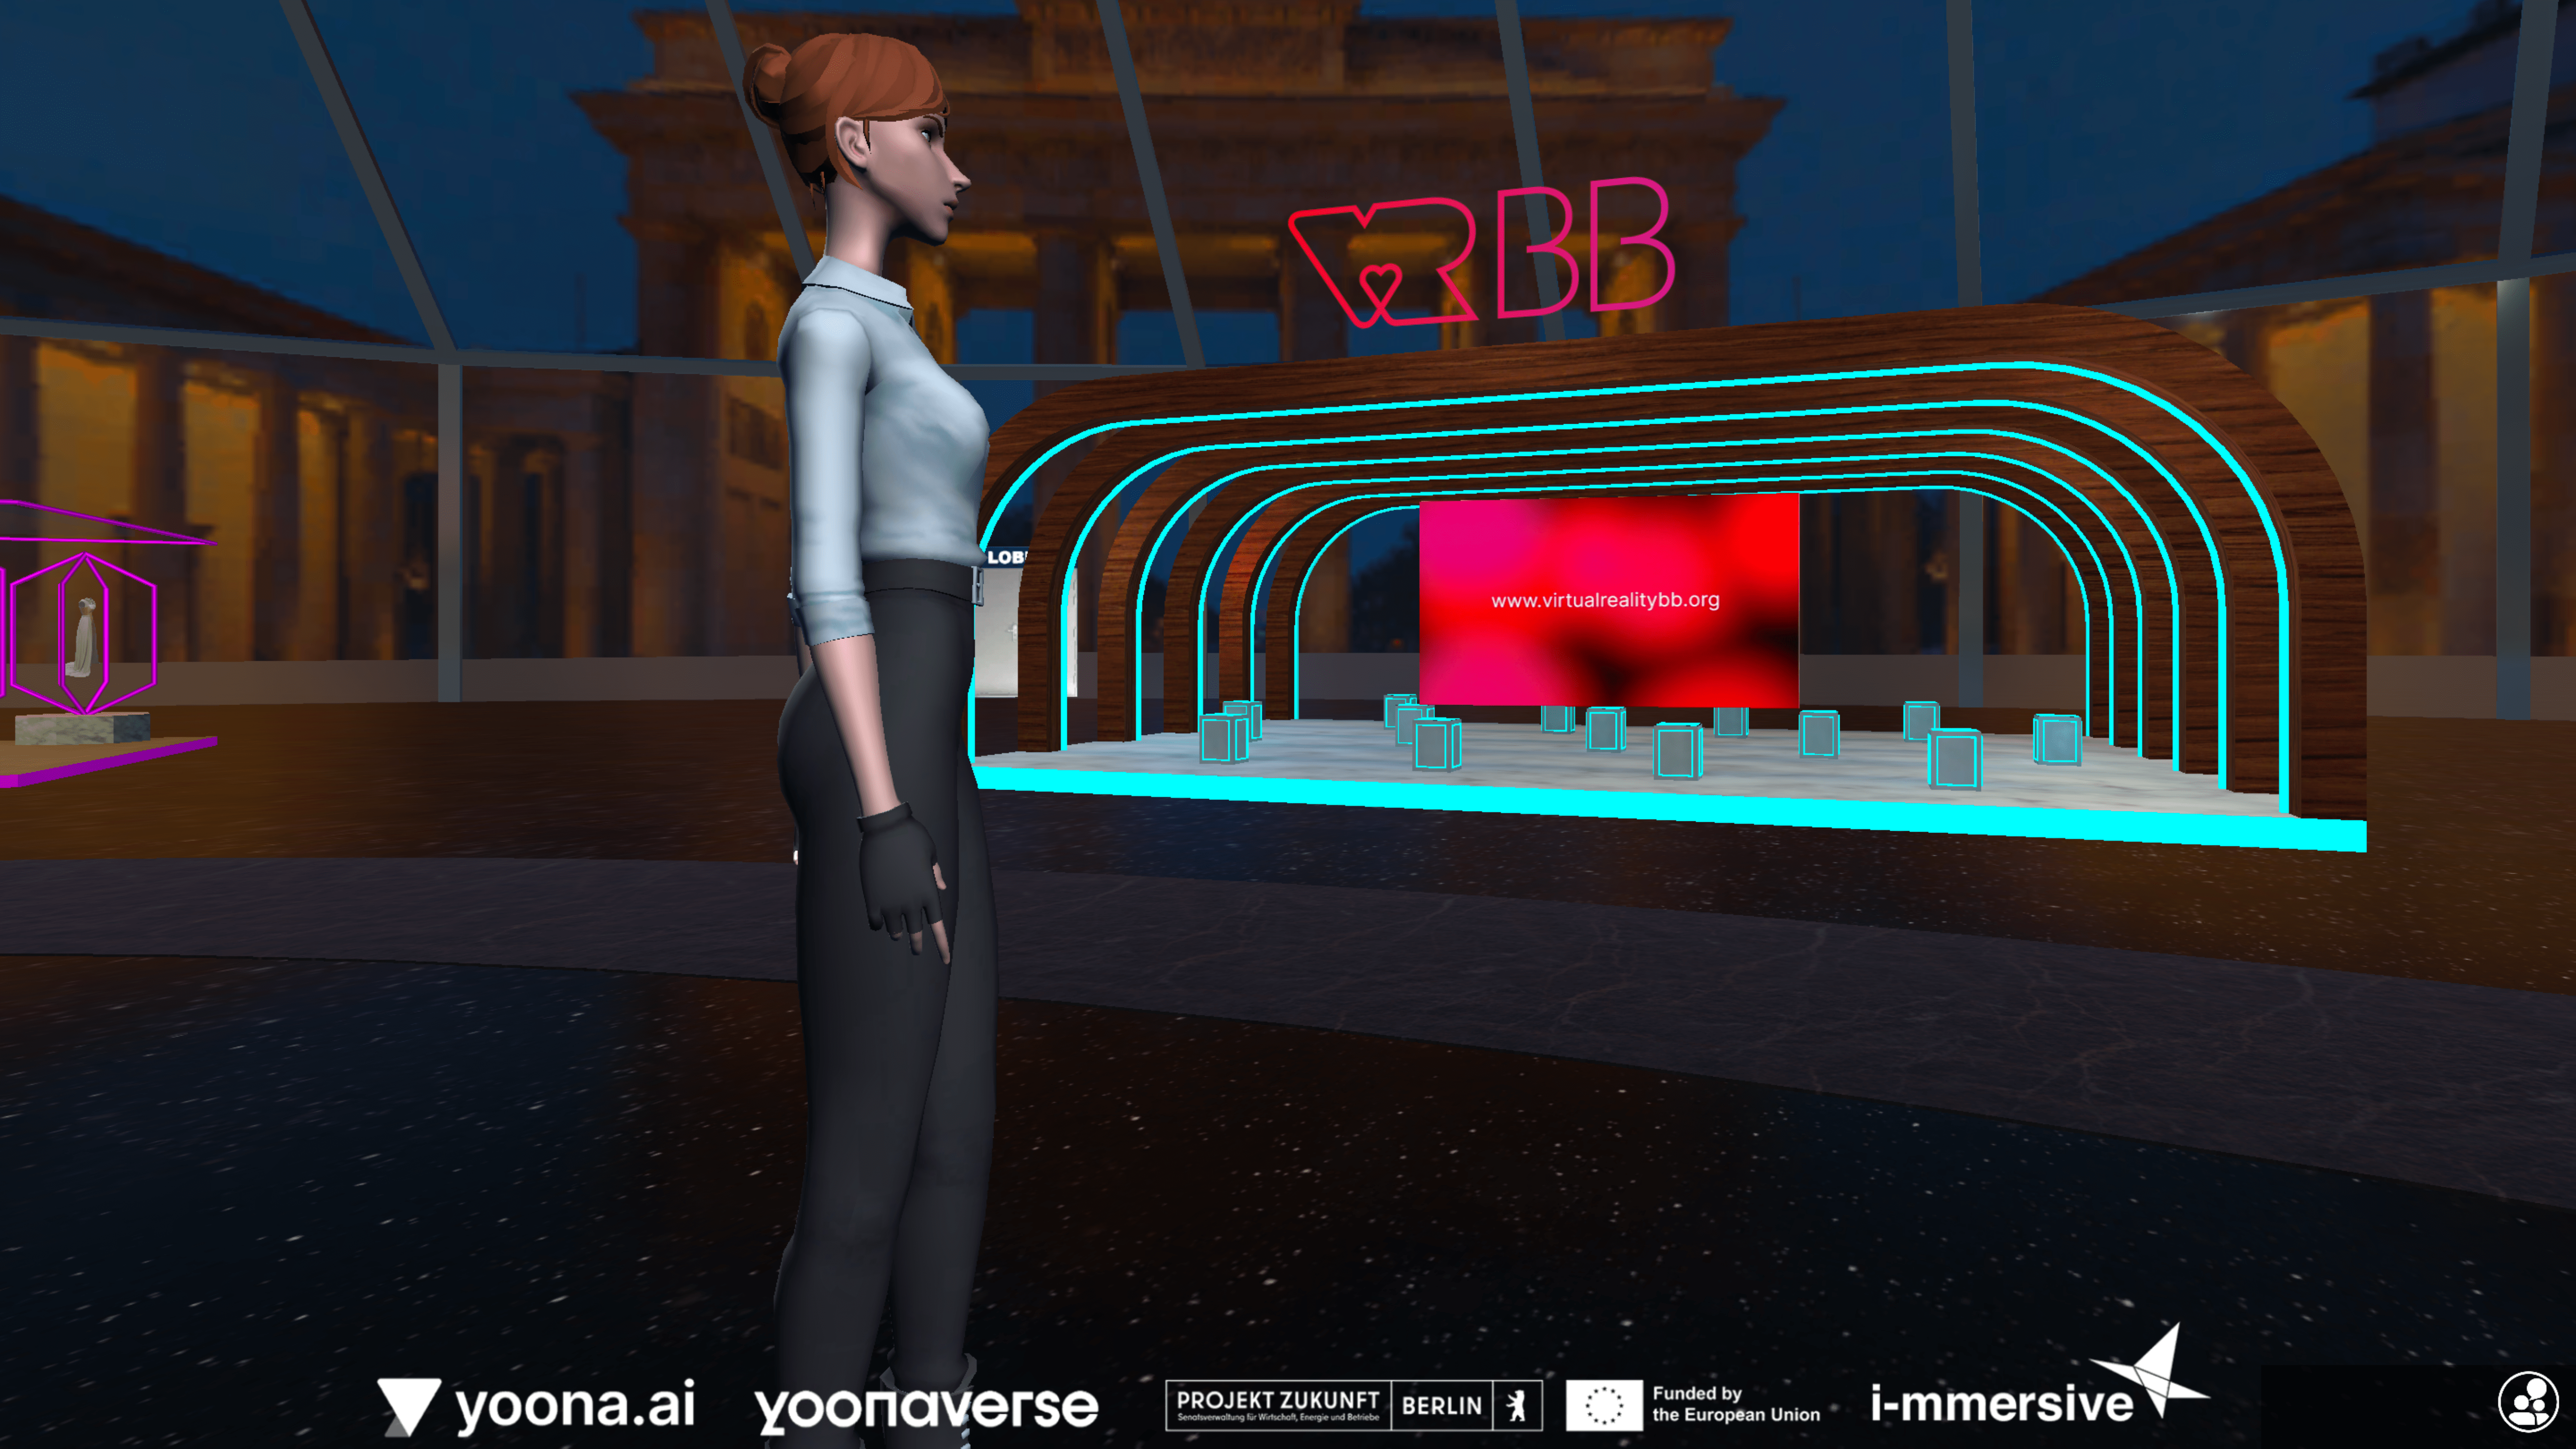 Berlin Fashion Week - Technological, Global & Immersive Through The Yoonaverse Conference  (2)